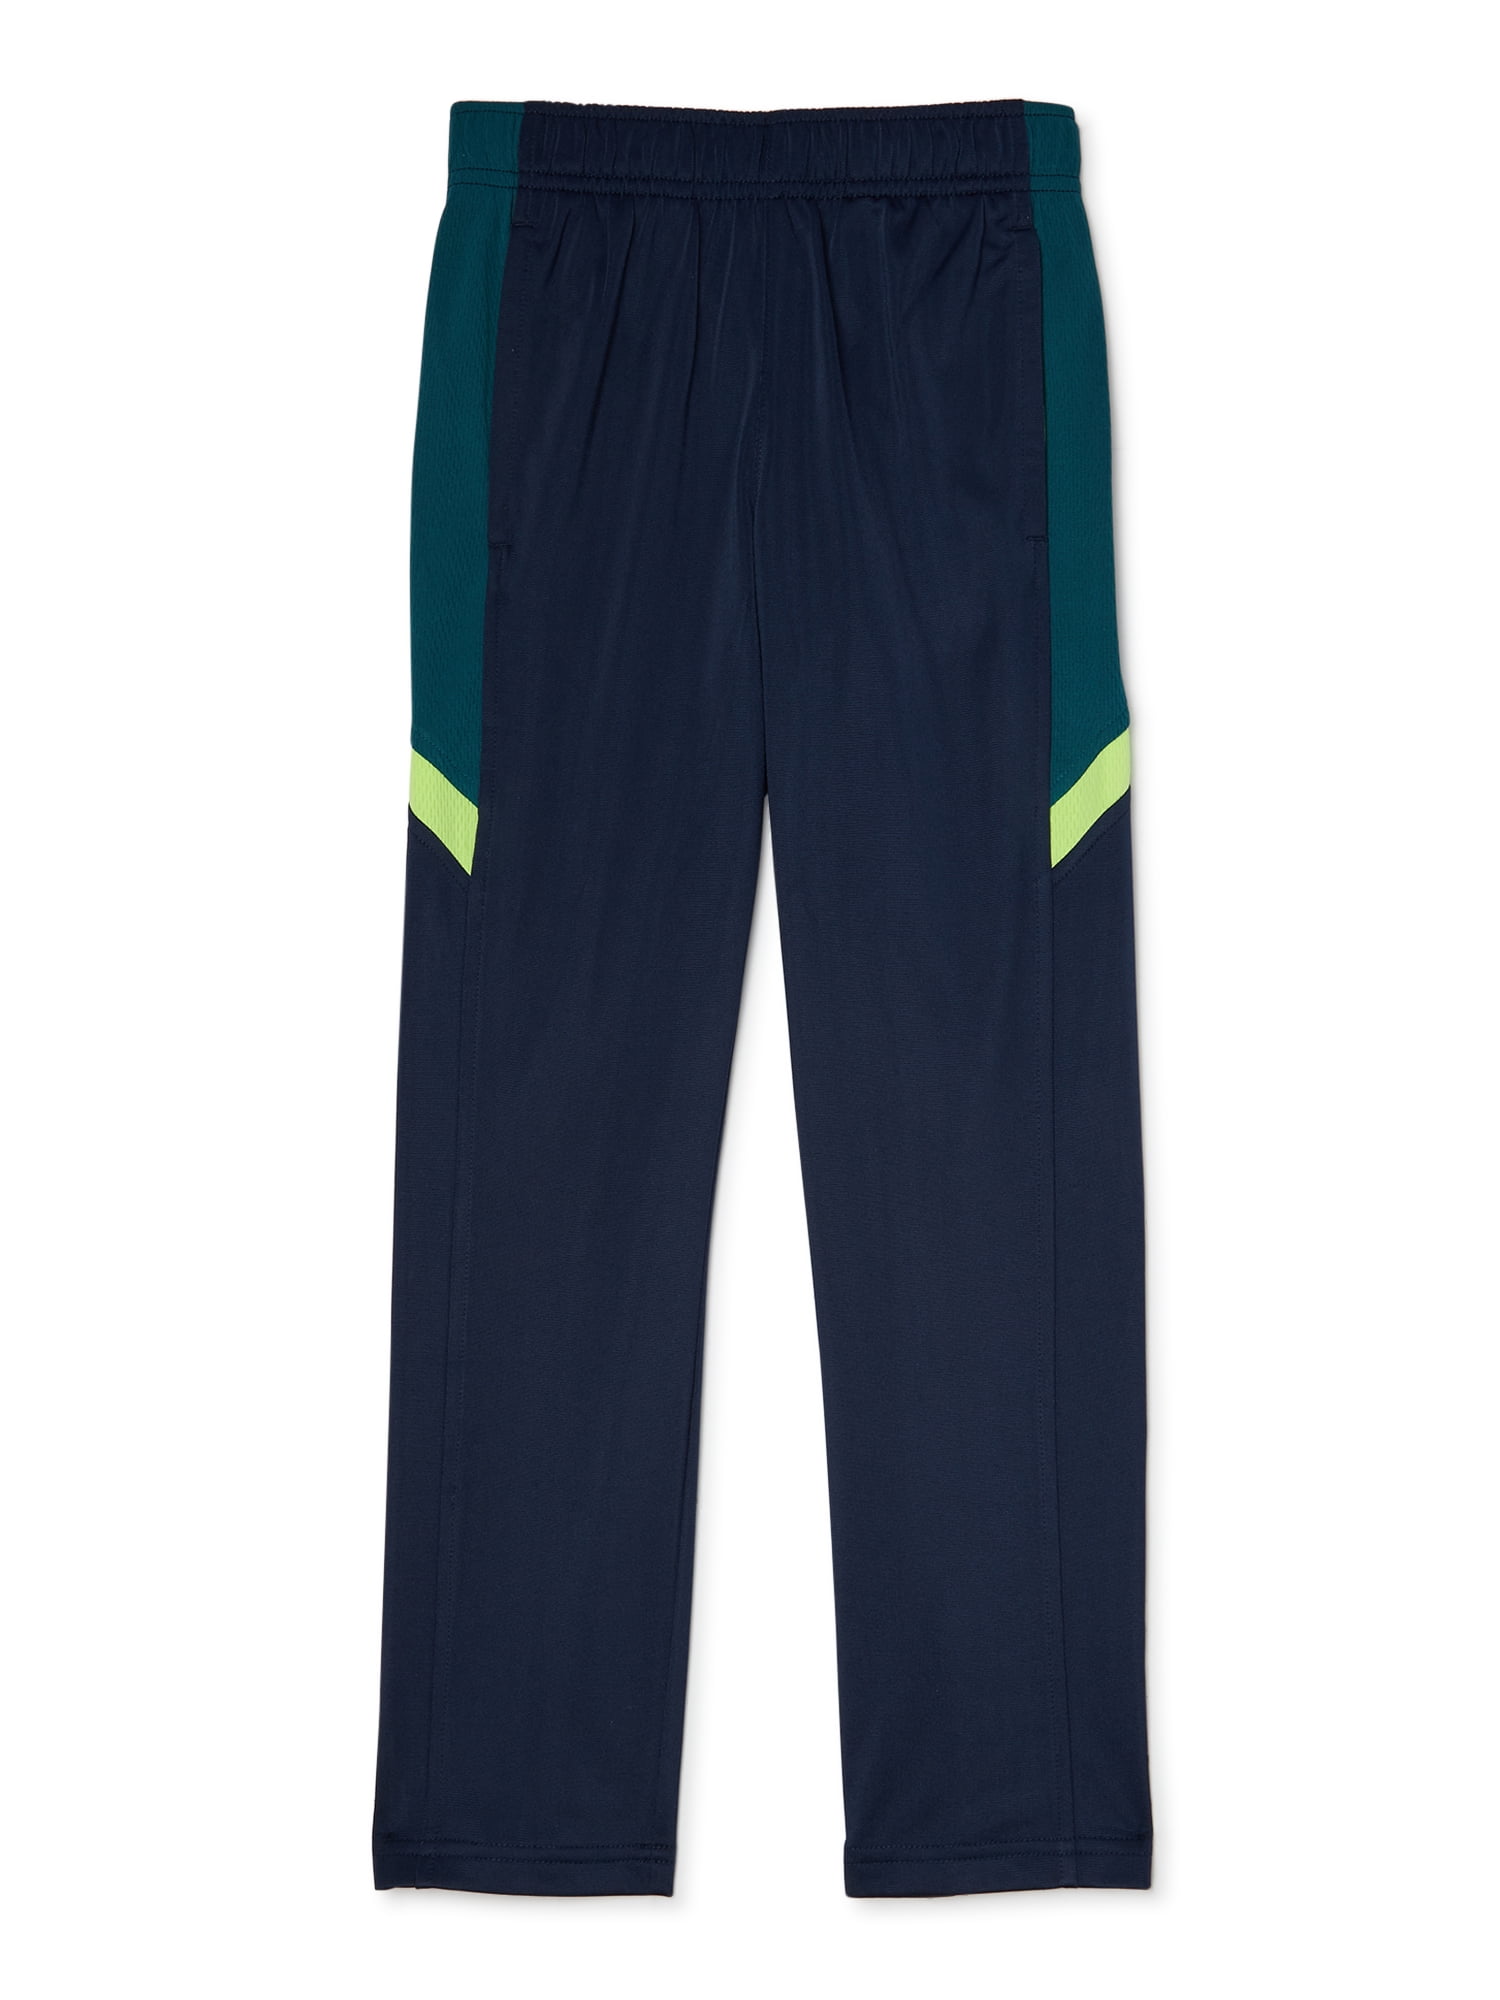 Find Your Perfect Athletic Works Boys Tricot Track Pants, Sizes 4-18 &  Husky 